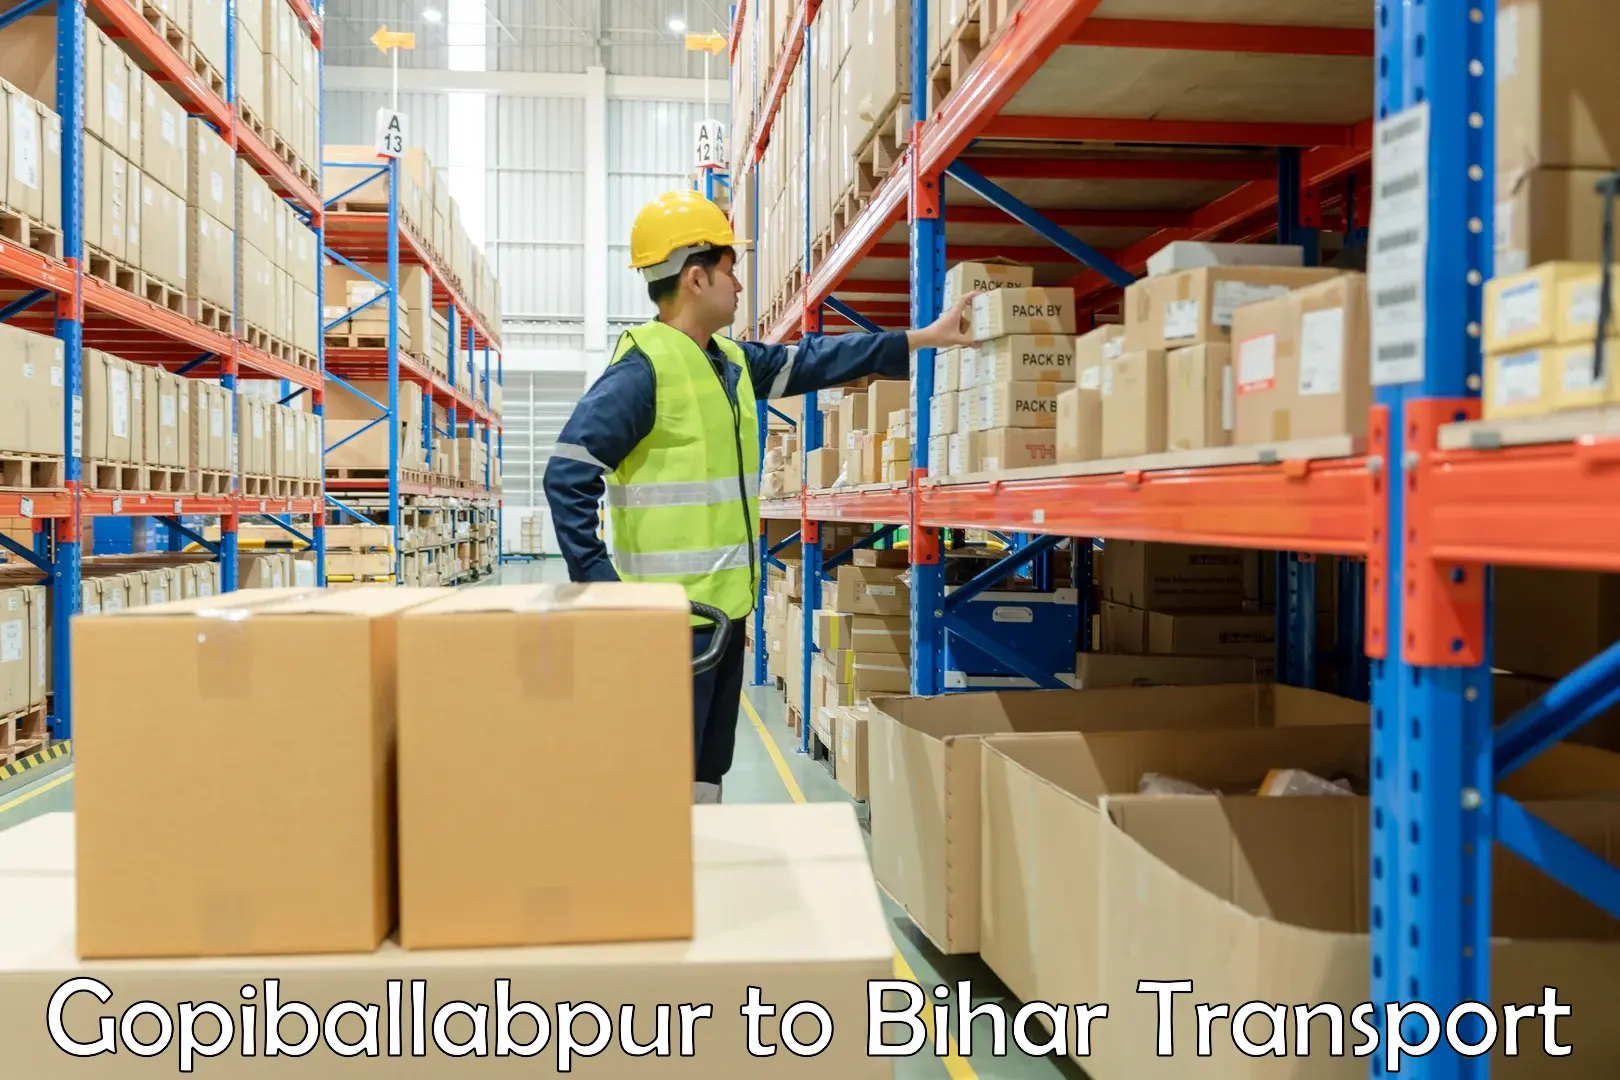 Daily parcel service transport Gopiballabpur to Chainpur